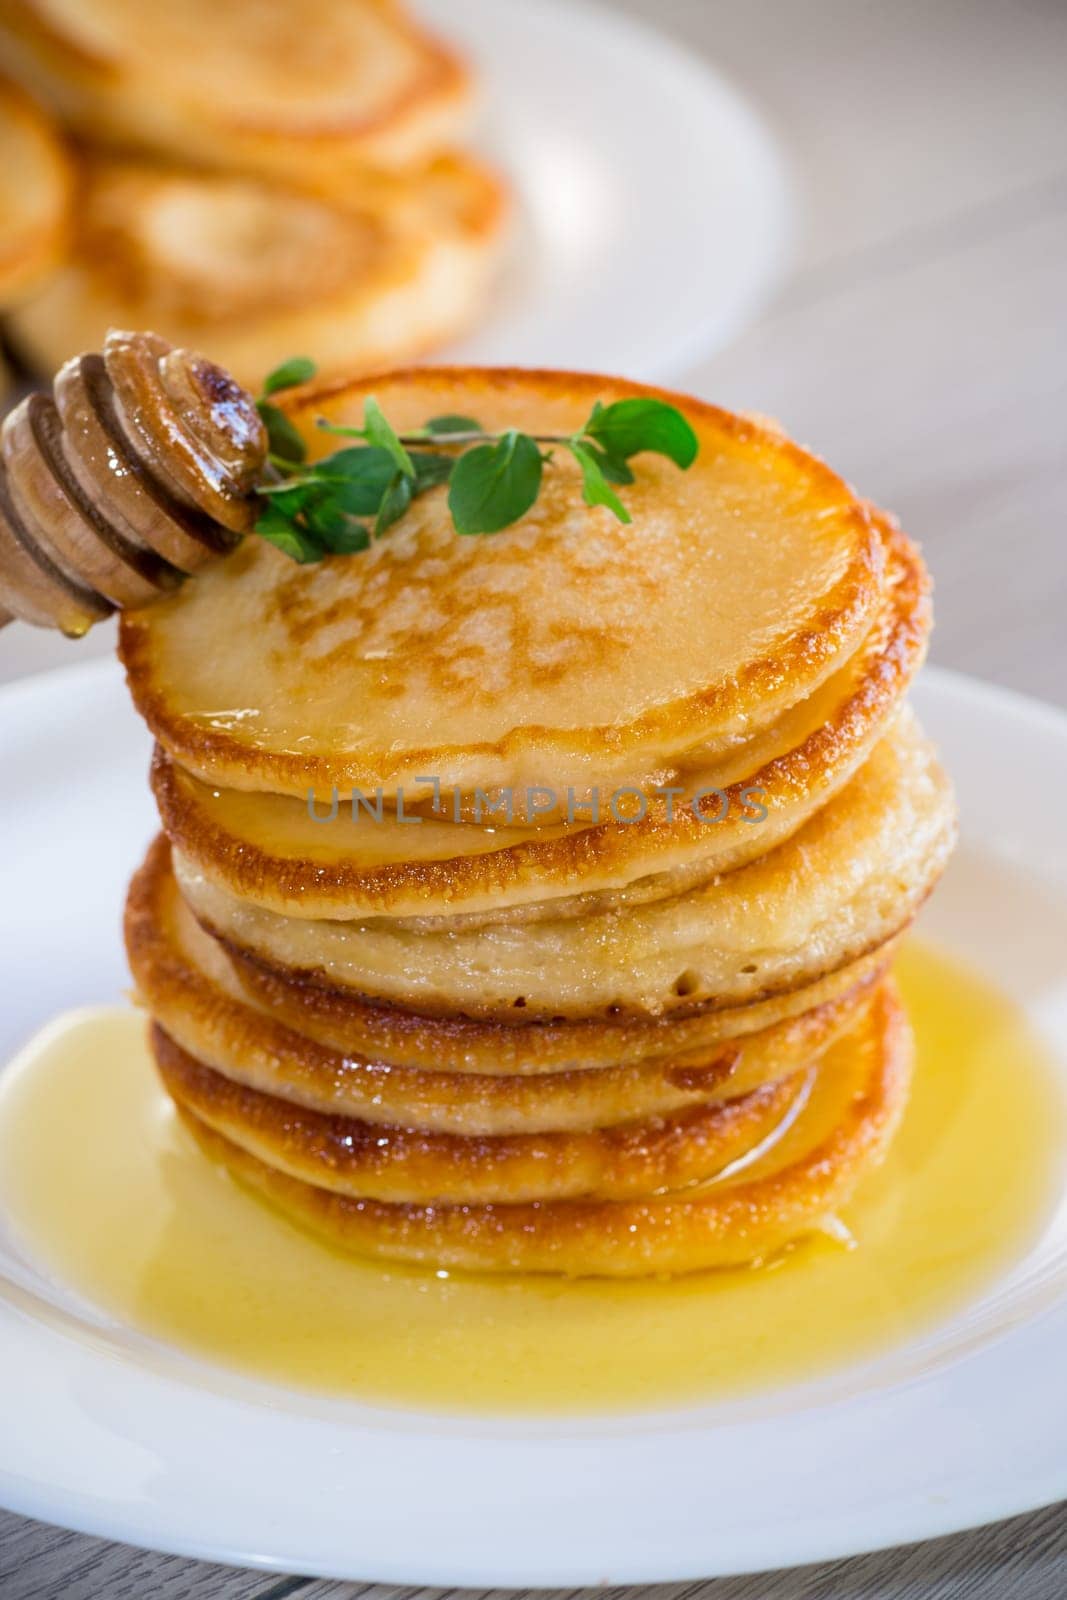 cooked sweet pancakes with honey in a plate on a light wooden table.